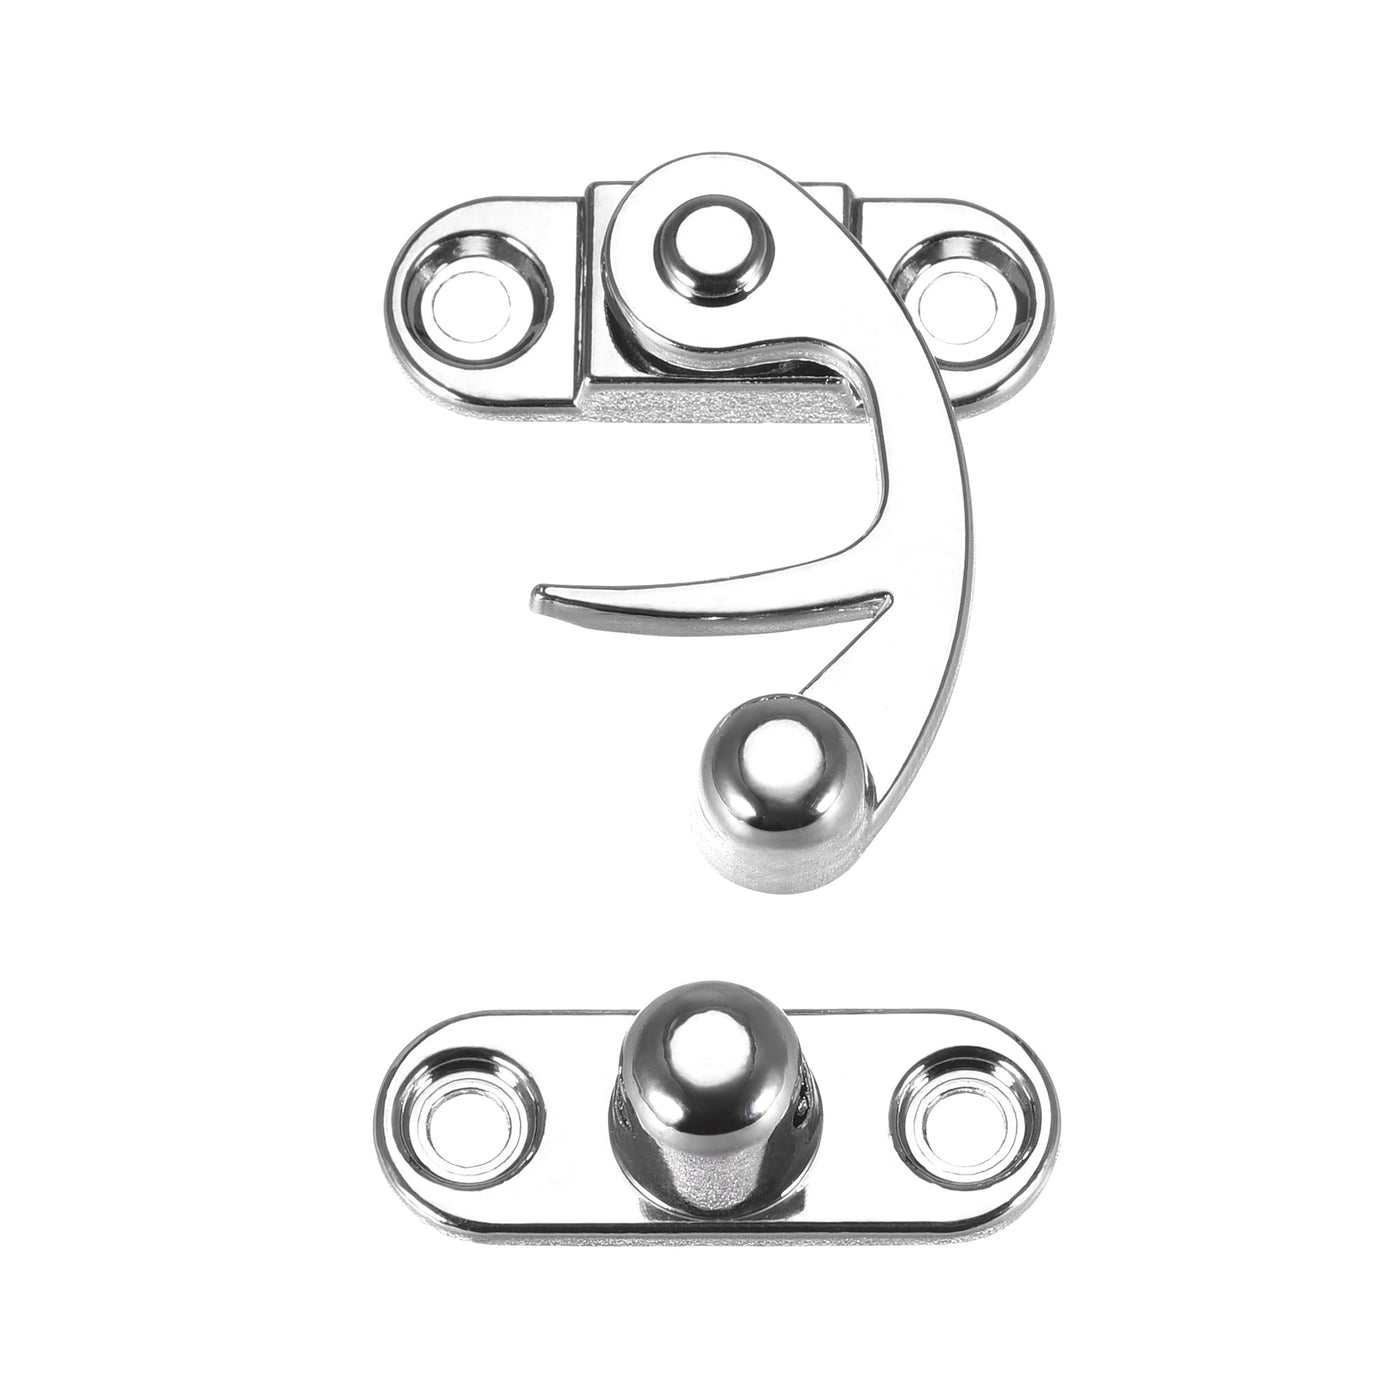 uxcell Uxcell Vintage Lock Clasp Right Latch Hook Hasp 32mmx28mm Swing Arm Latch Silver Tone 2 Pcs